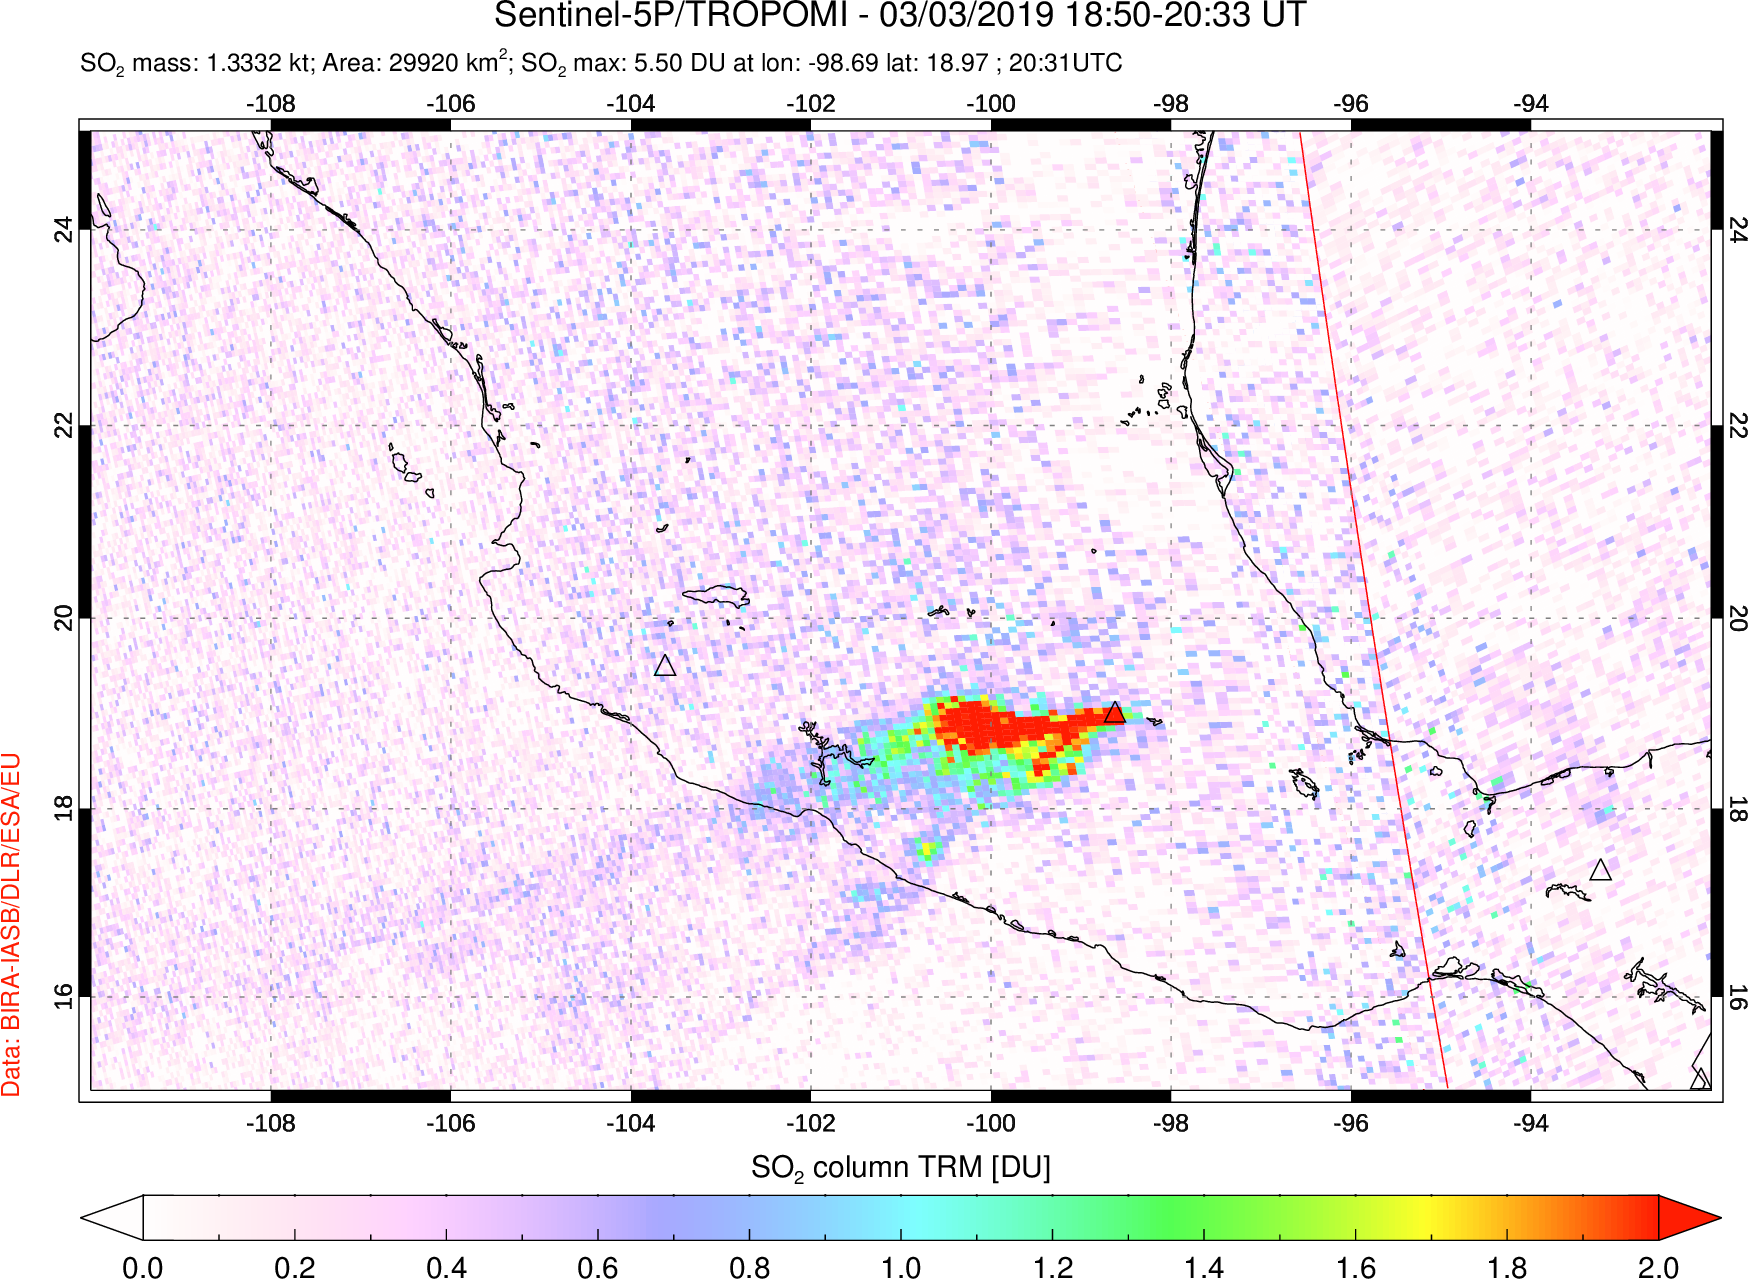 A sulfur dioxide image over Mexico on Mar 03, 2019.